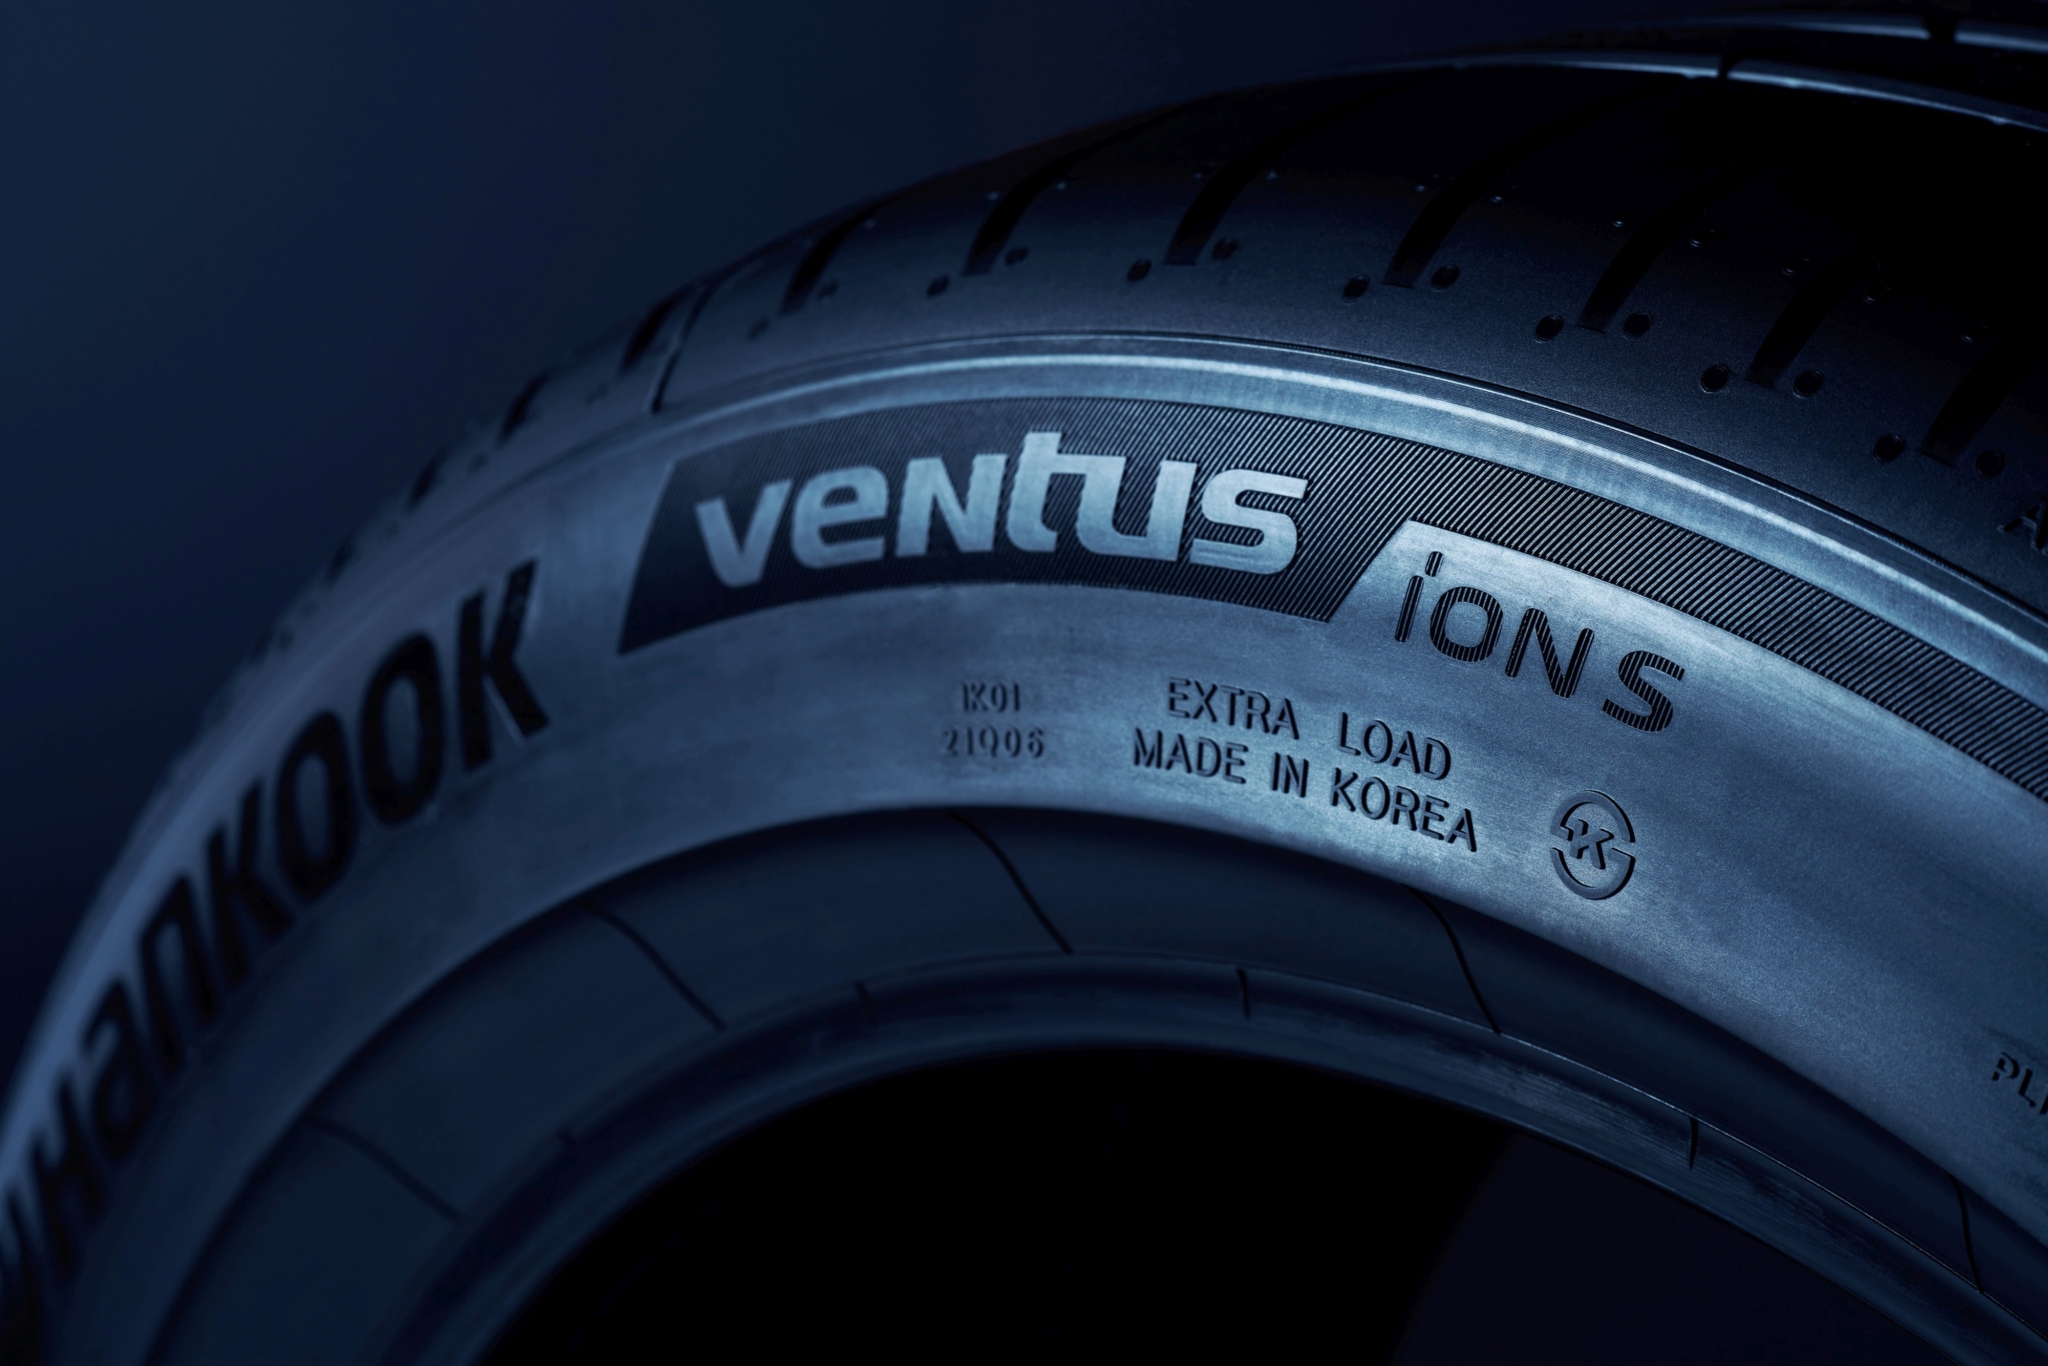 Hankook iON: the new global tyre family for EVs